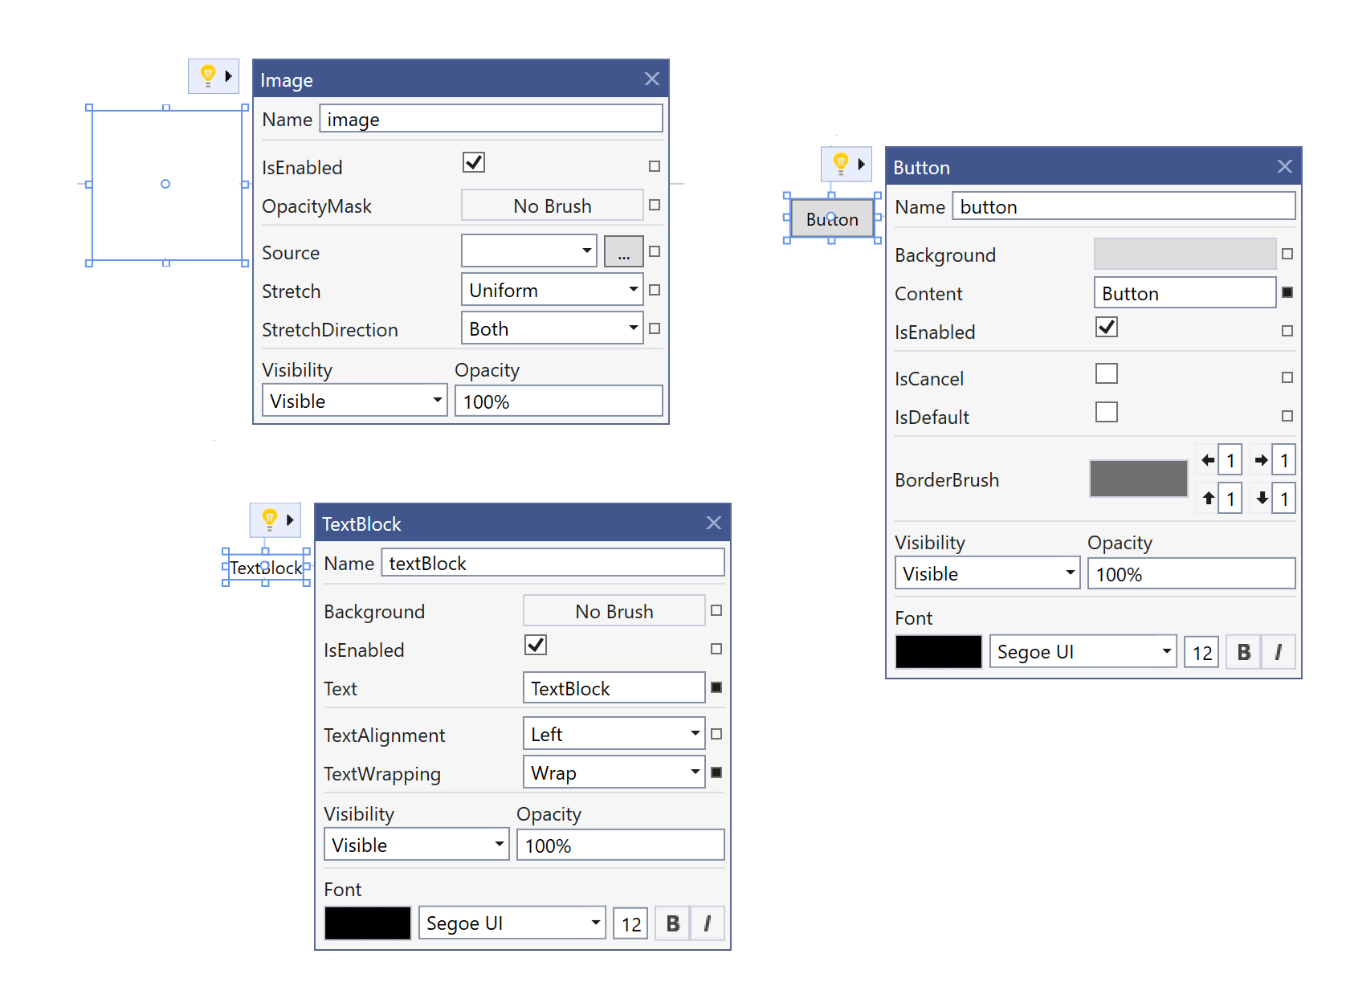 Figure 6: Suggested Actions for Image, Button, and TextBlock in XAML designer